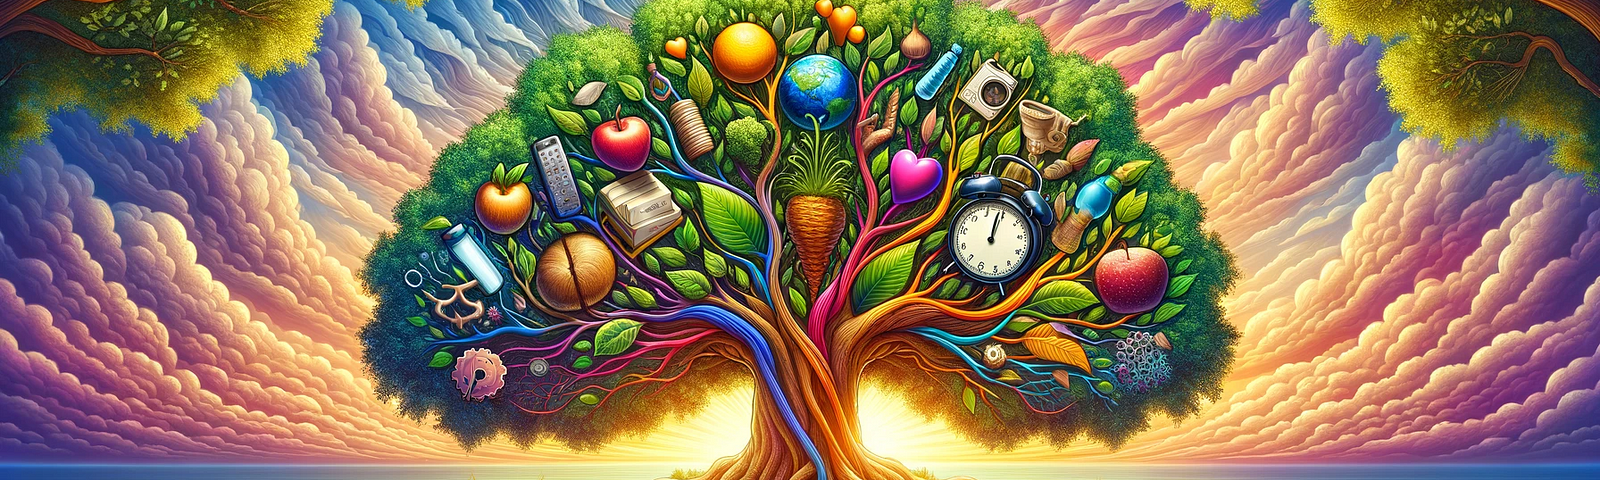 A tree full of items like: clock, bottle of water, heart, fruits or book